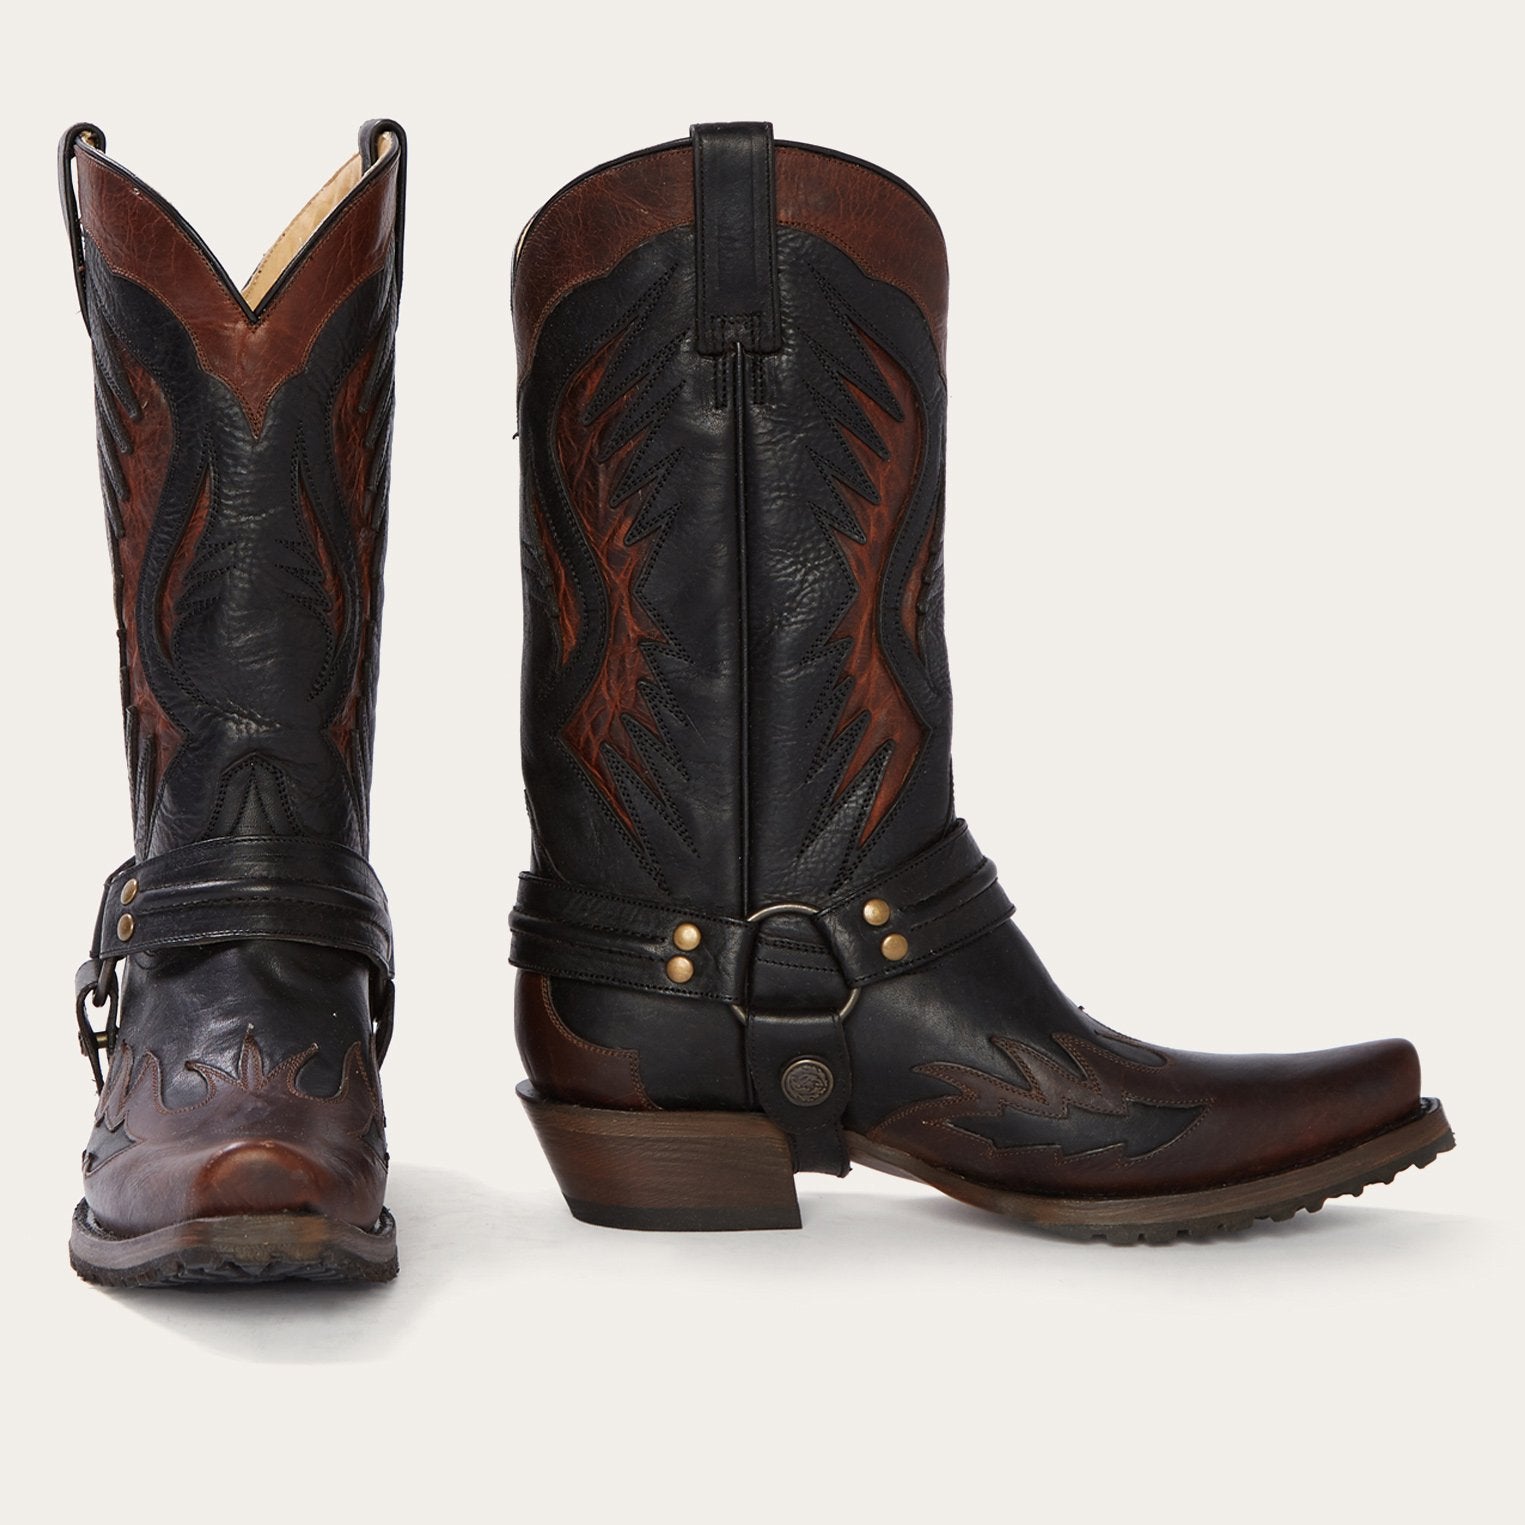 outlaw brand cowboy boots